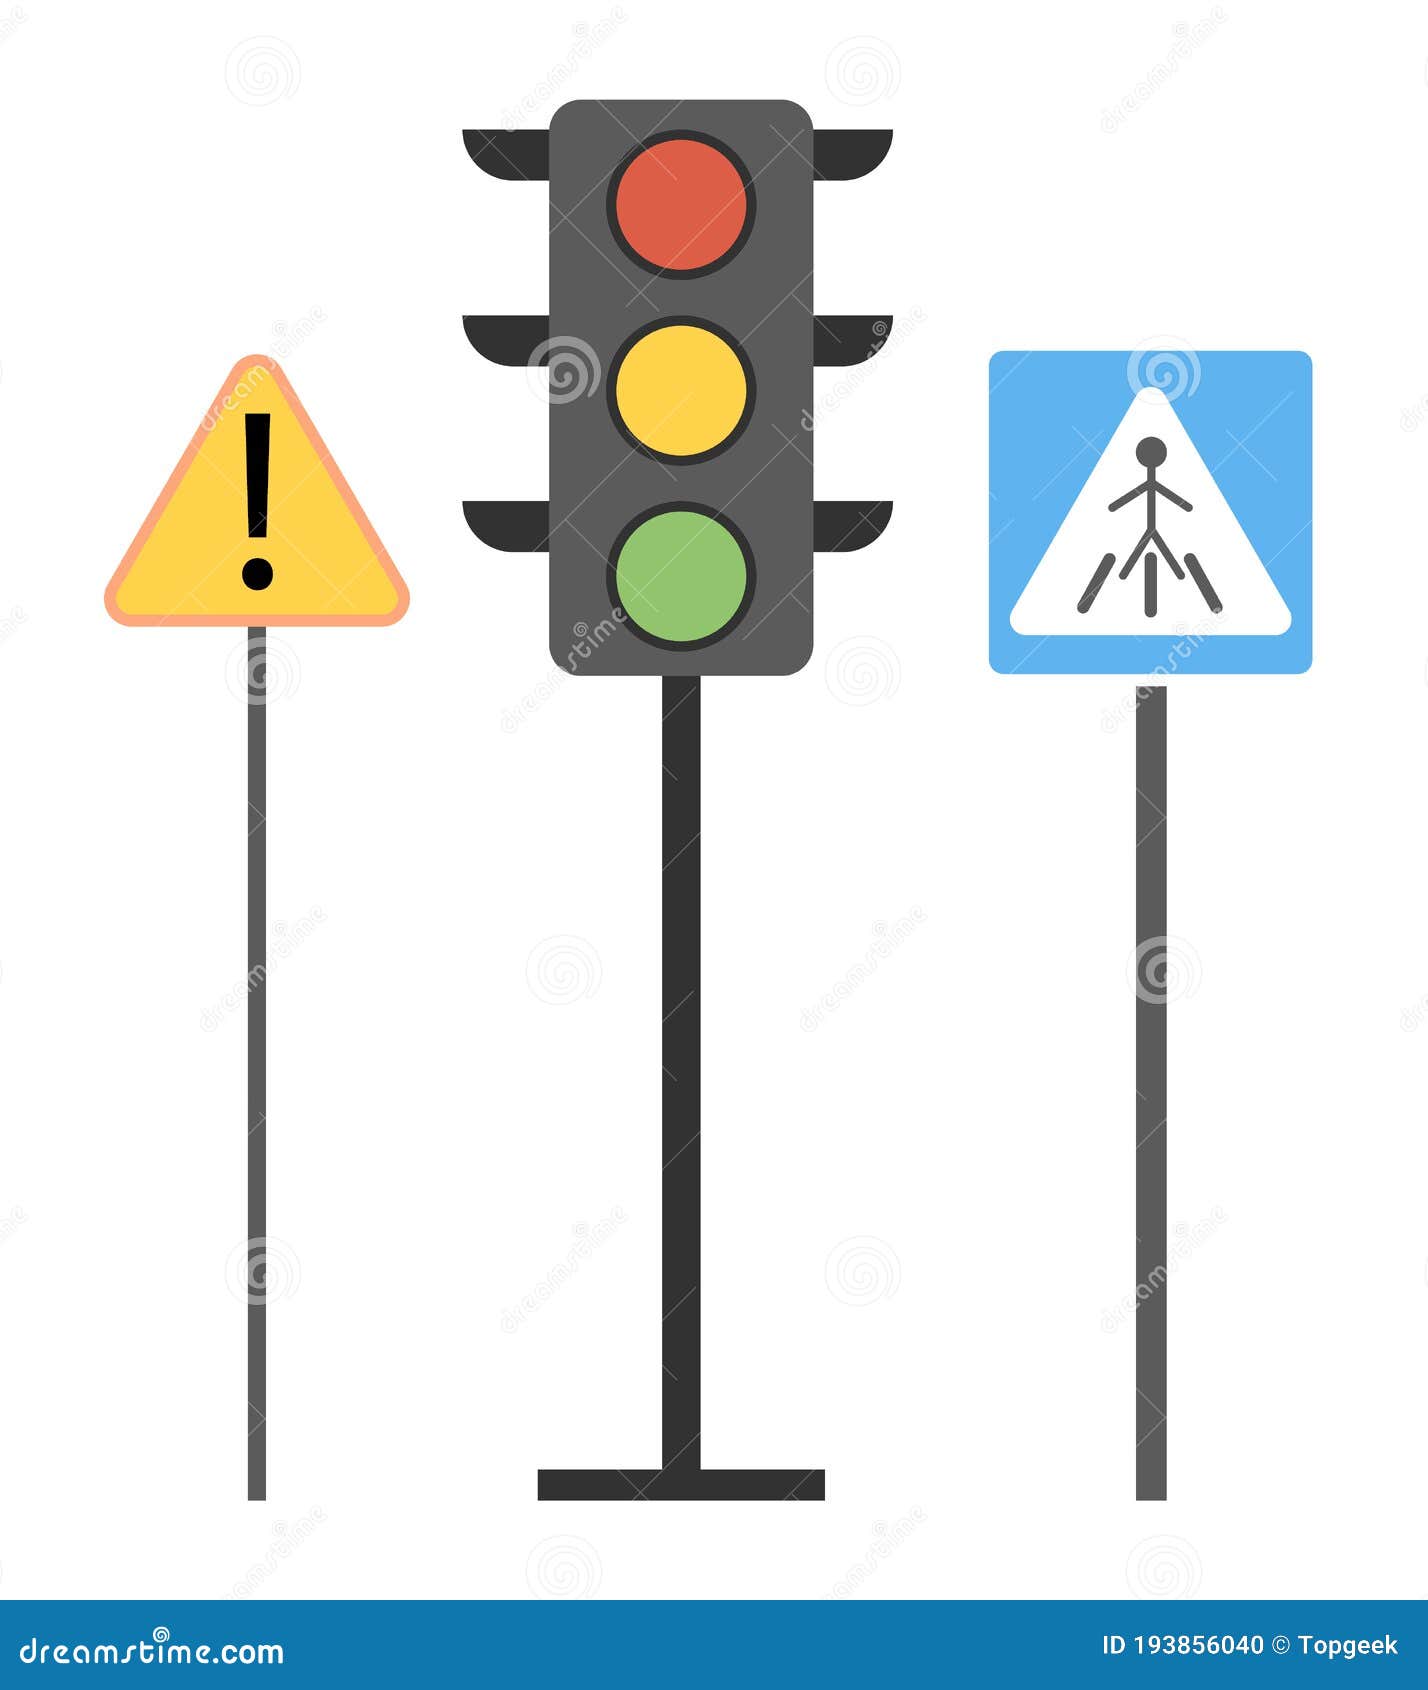 Rules Pedestrians Meaning Traffic Light Signals Stock Vector (Royalty Free)  1709787724